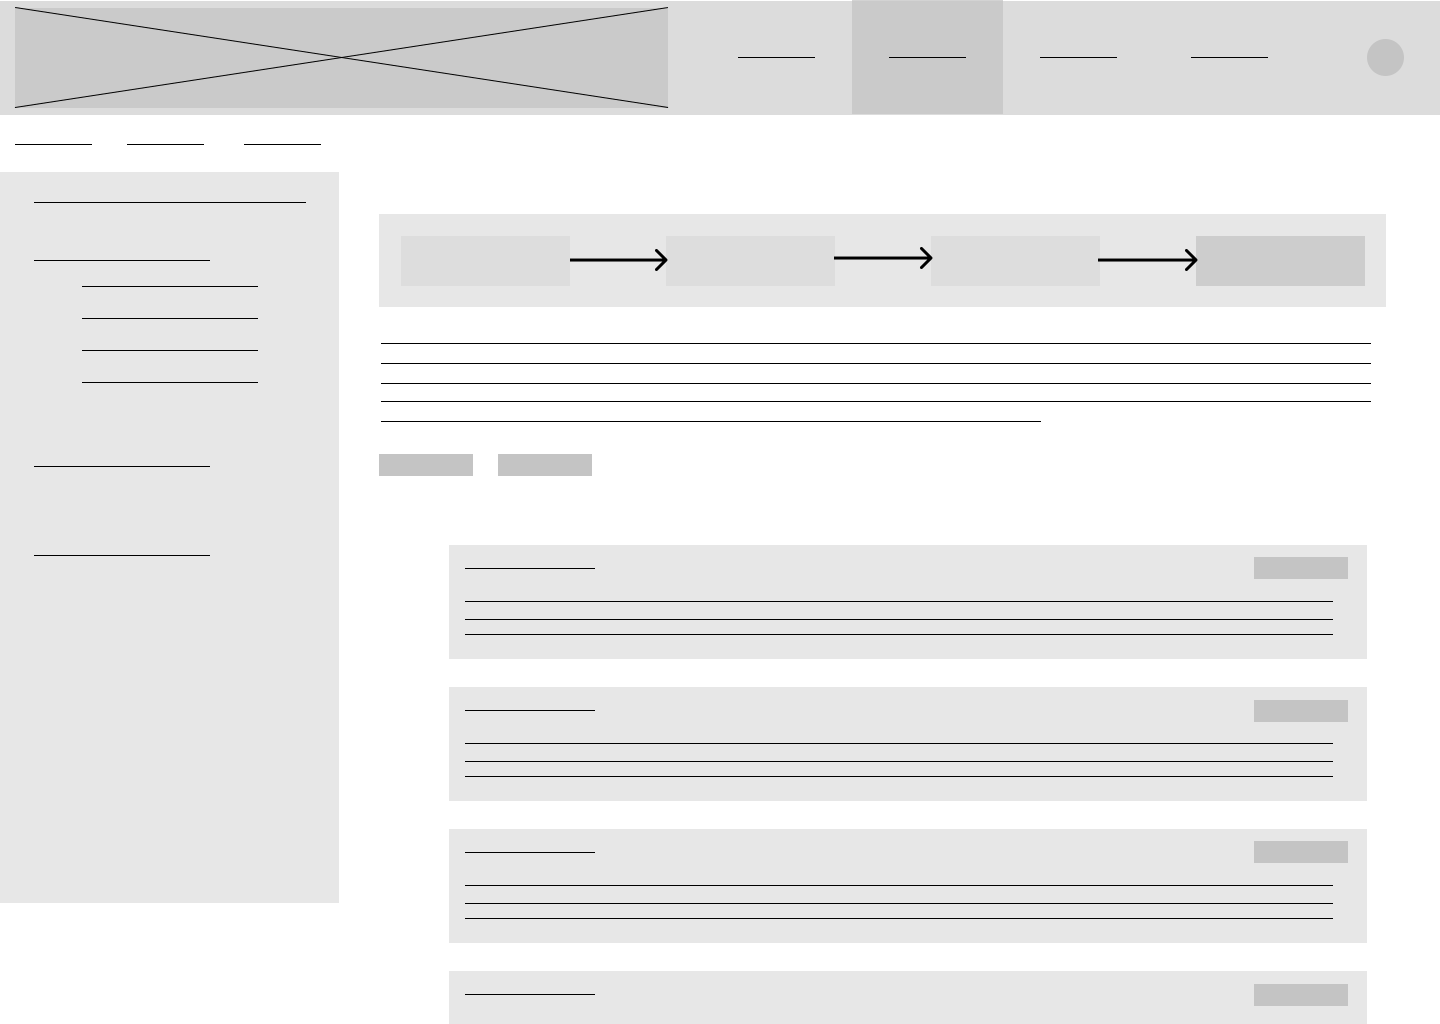 Example of the Content section made with Figma